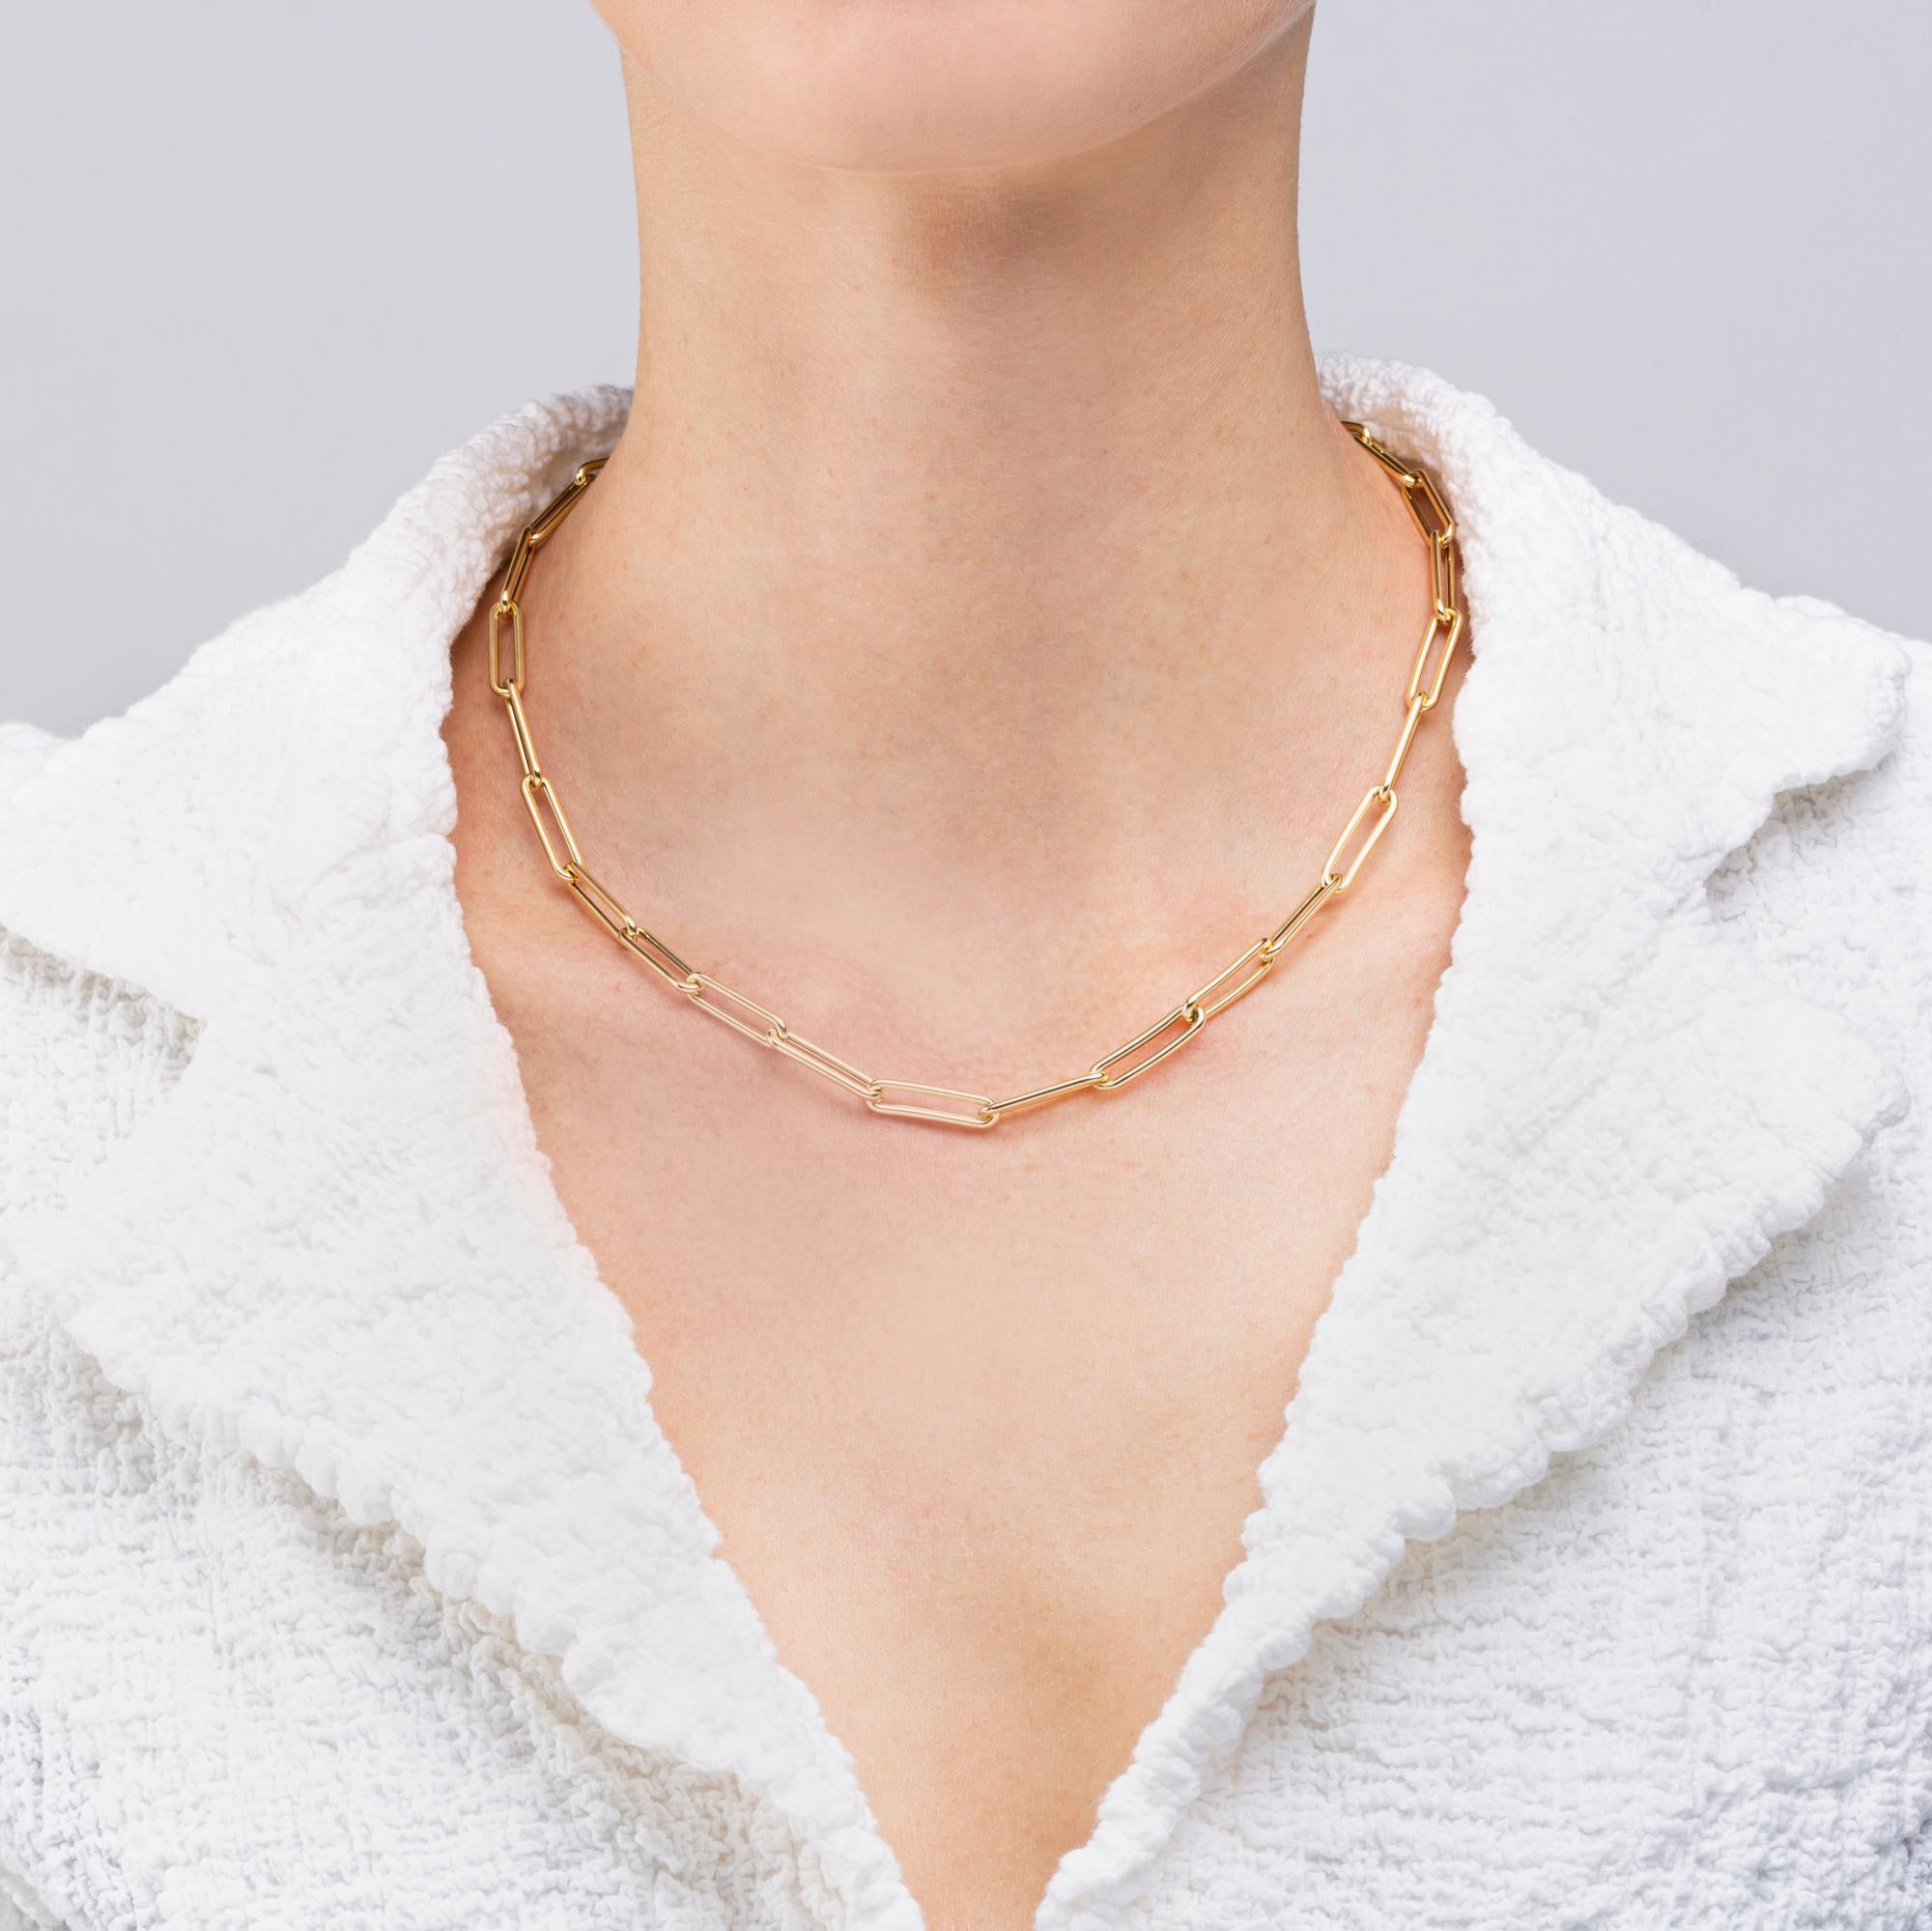 Jona Design Collection, Hand crafted in Italy, 18 karat yellow gold, 17.7inch-45cm long, link chain necklace. All Jona jewelry is new and has never been previously owned or worn. Each item will arrive at your door beautifully gift wrapped in Jona